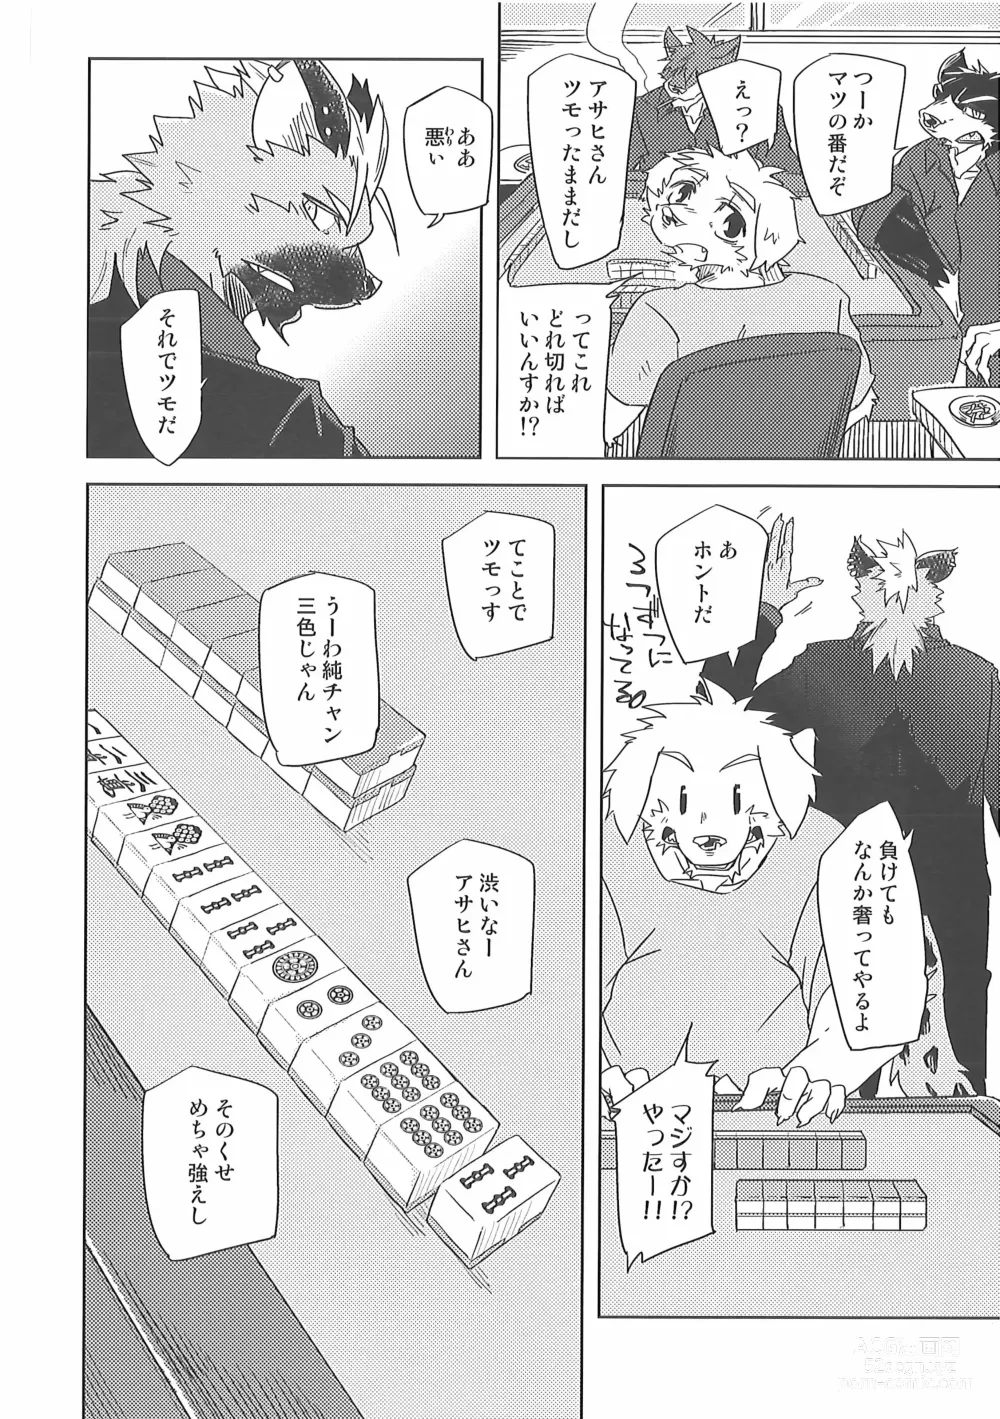 Page 6 of doujinshi Water under The Bridge 1